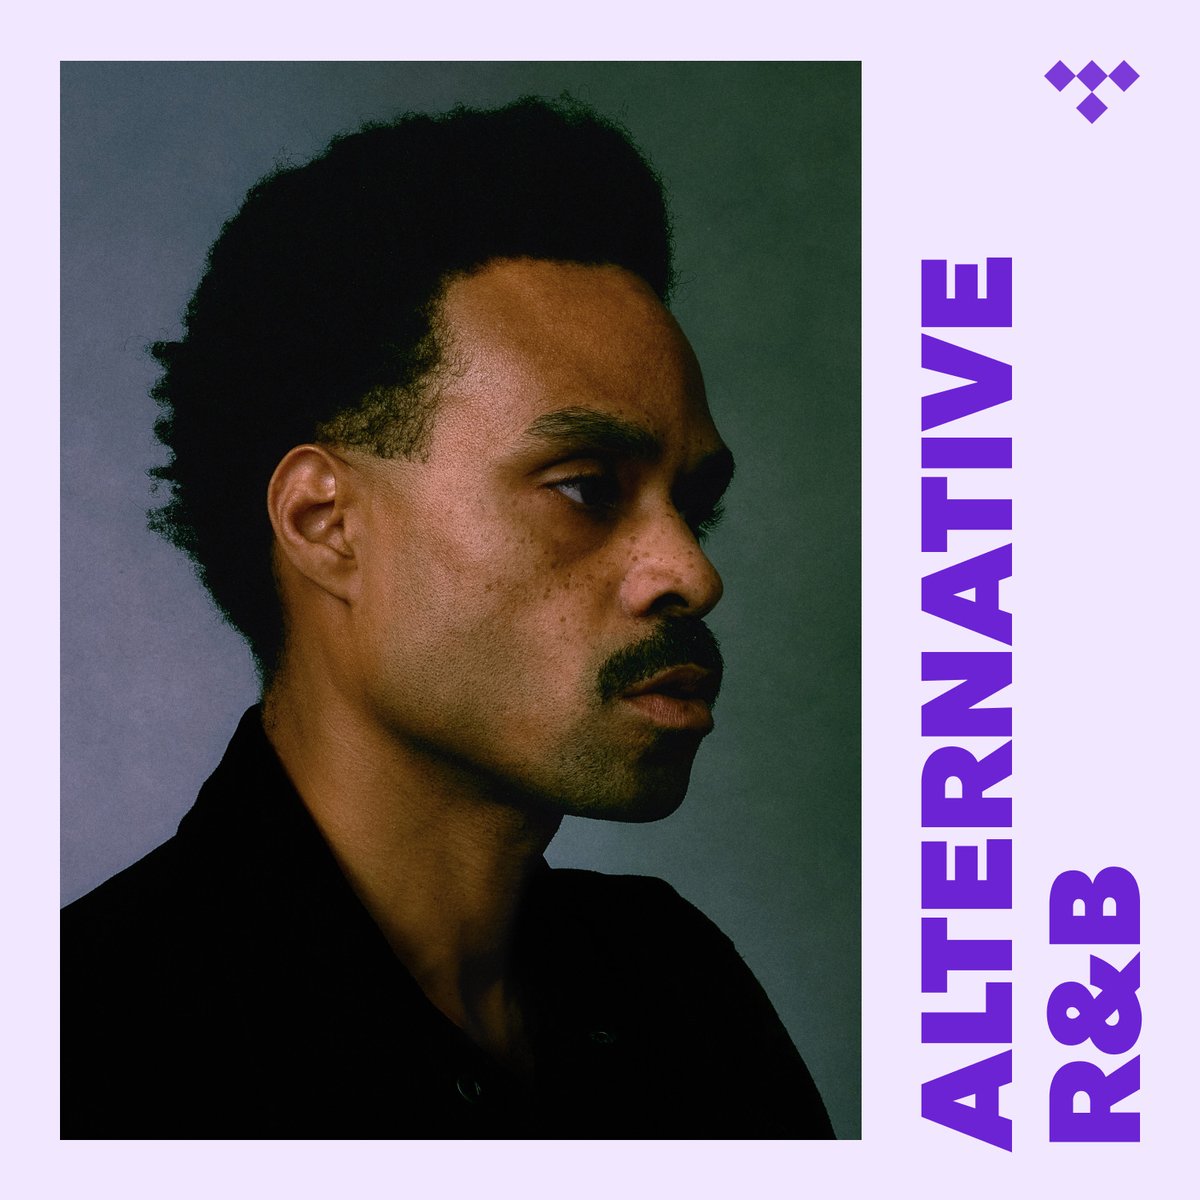 Go on a journey through @Bilal, @questlove, @robertglasper, and Burniss Travis's “Something To Hold (Live)” 🔥 featured on @TIDAL's 'Alternative R&B” playlist 🙌 tidal.com/browse/playlis…